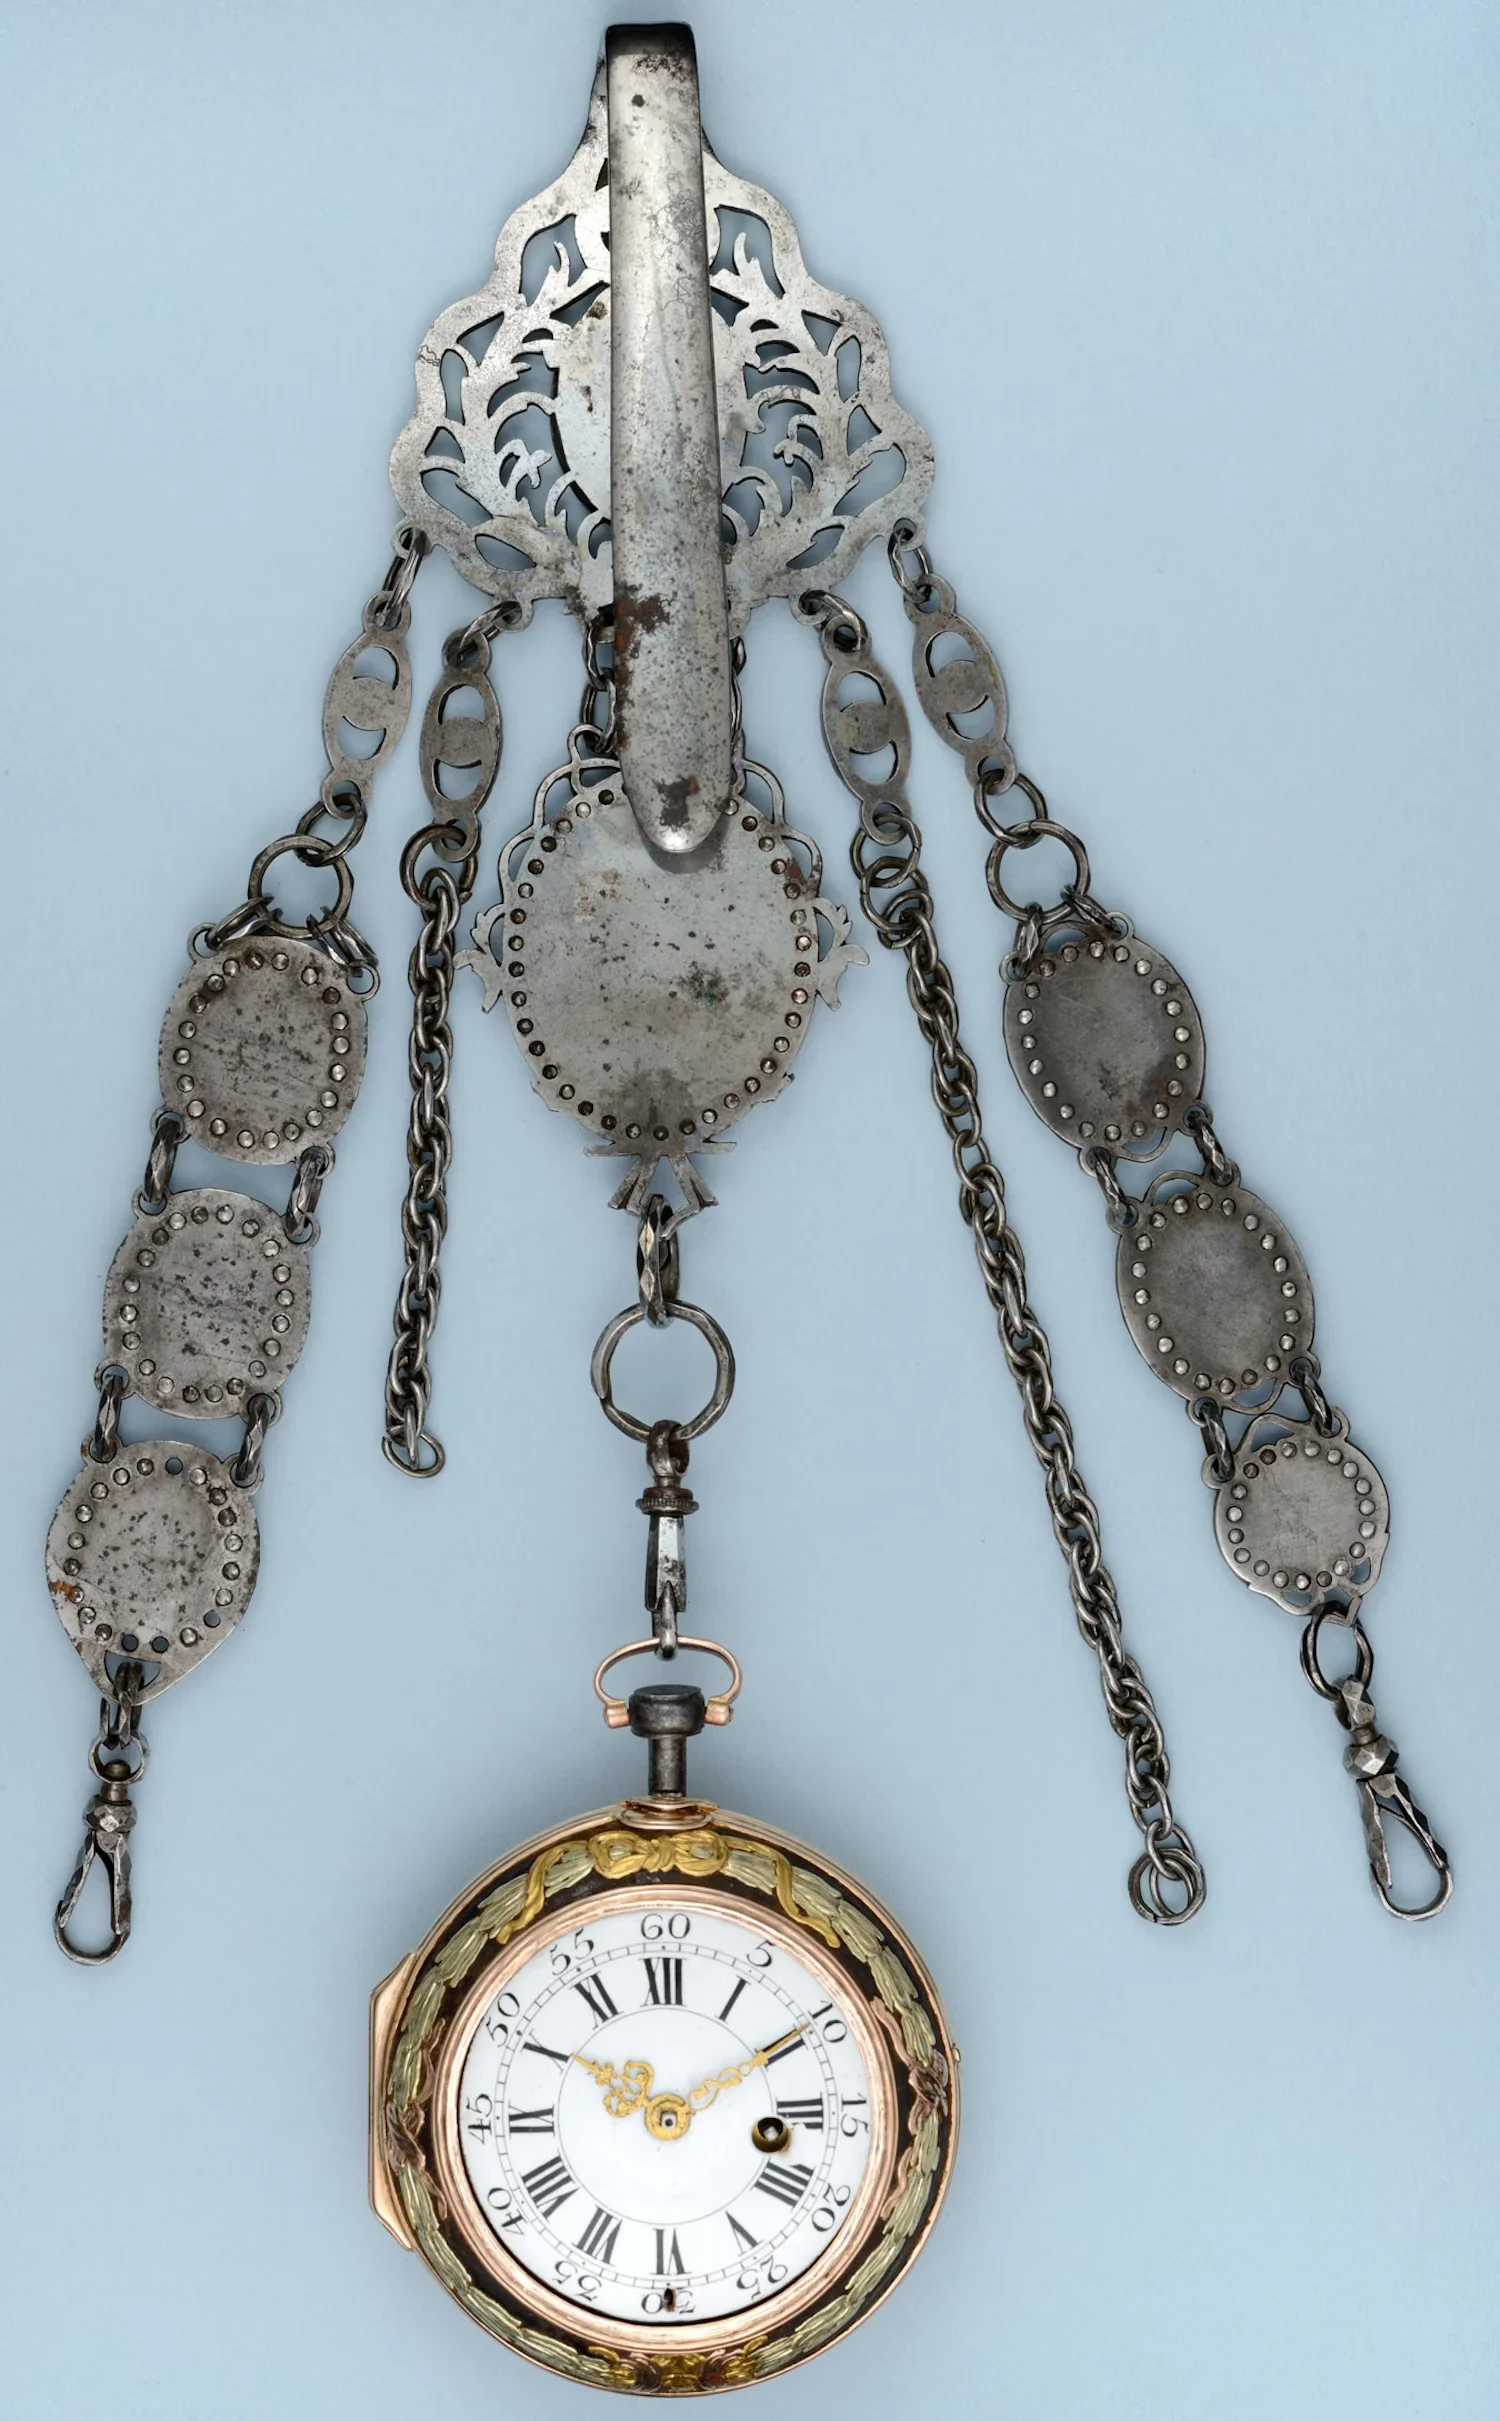 Pocket watch with enamel and chatelaine | Watches | Antiques - Gallery USTAR